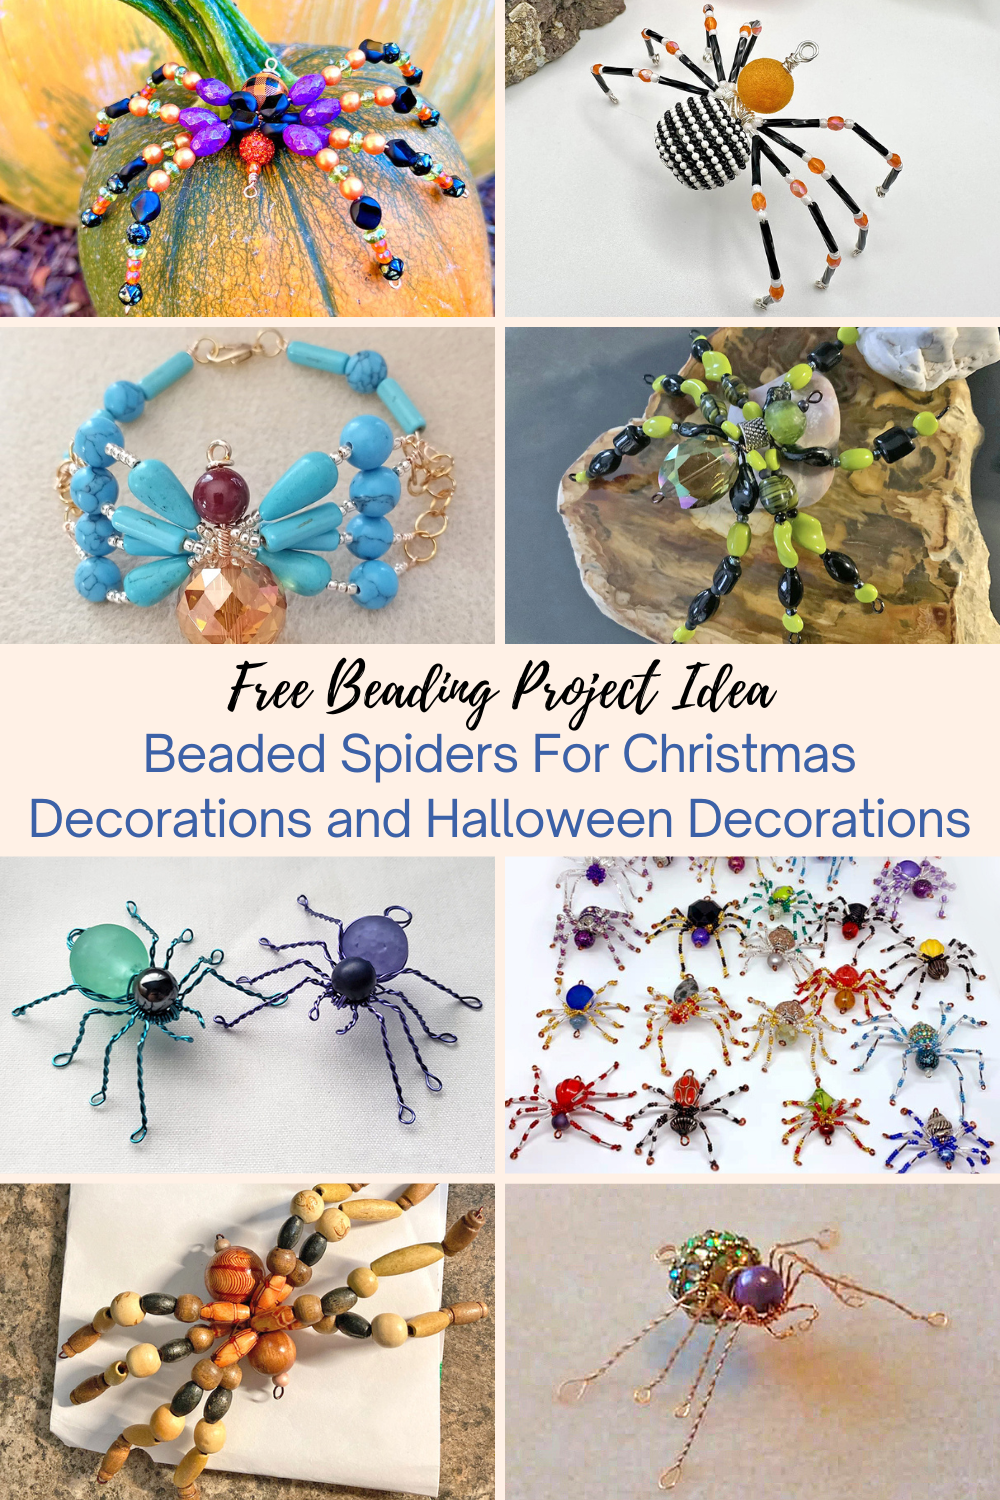 Beaded Spiders For Christmas Decorations and Halloween Decorations Collage